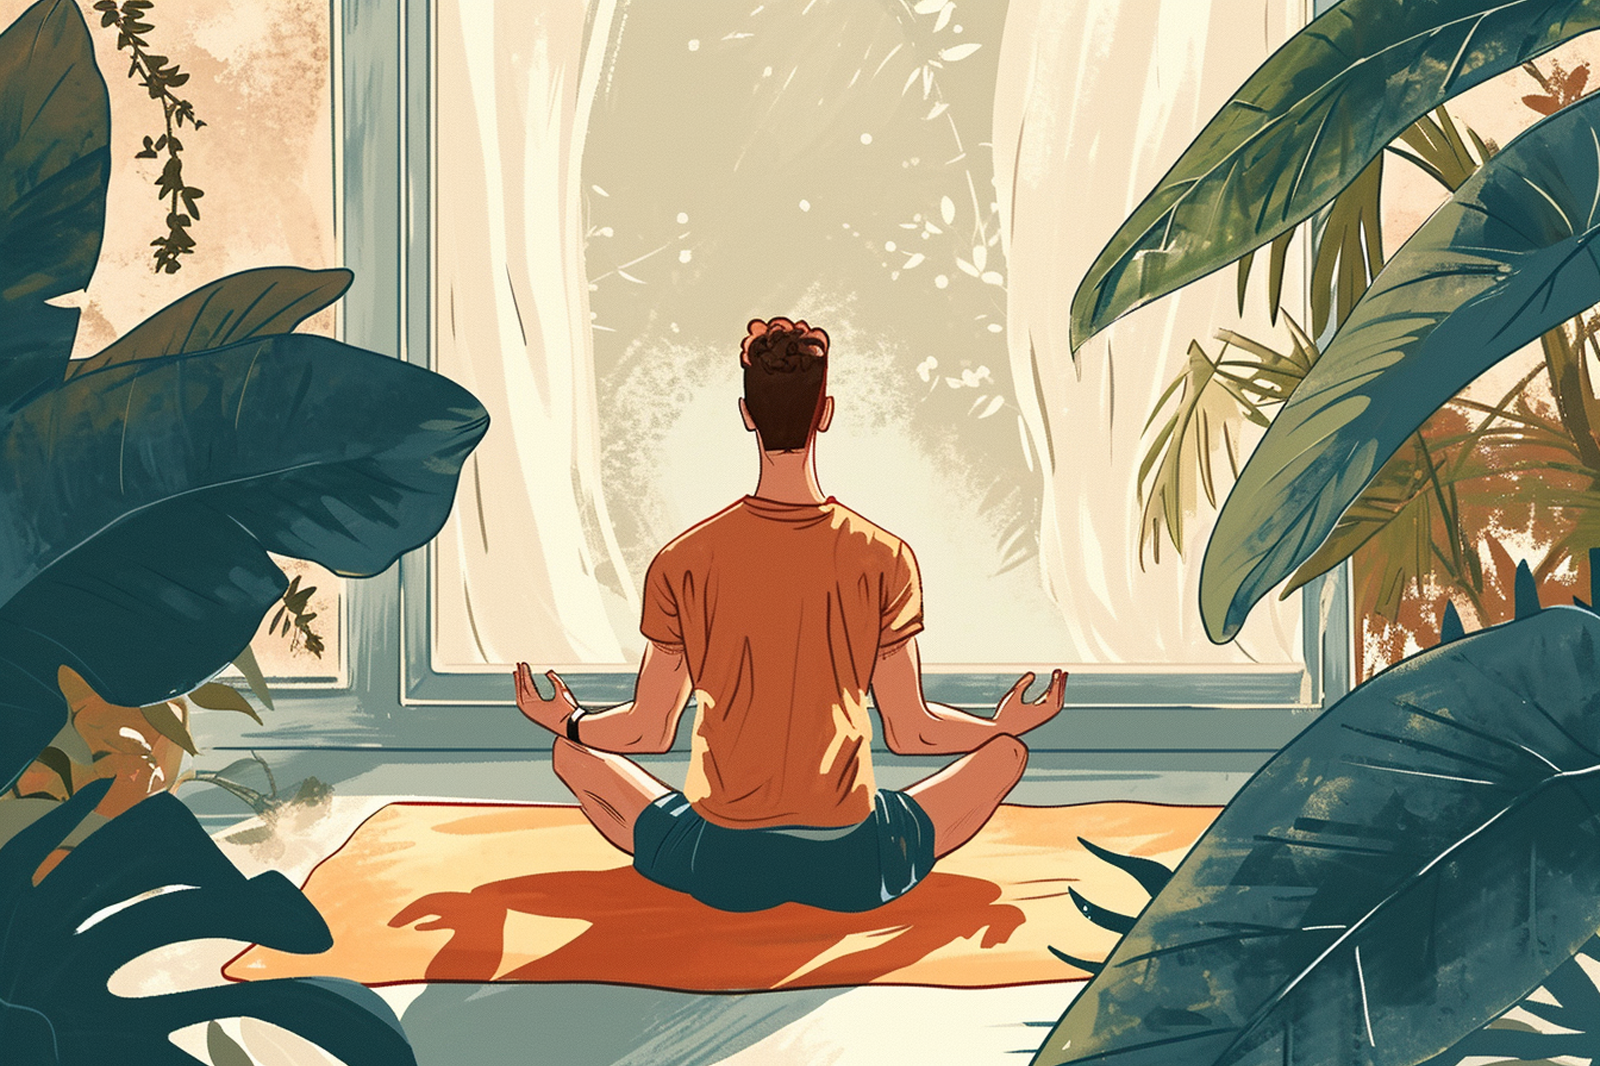 A man is practicing yoga for relaxation in his room, surrounded by green trees